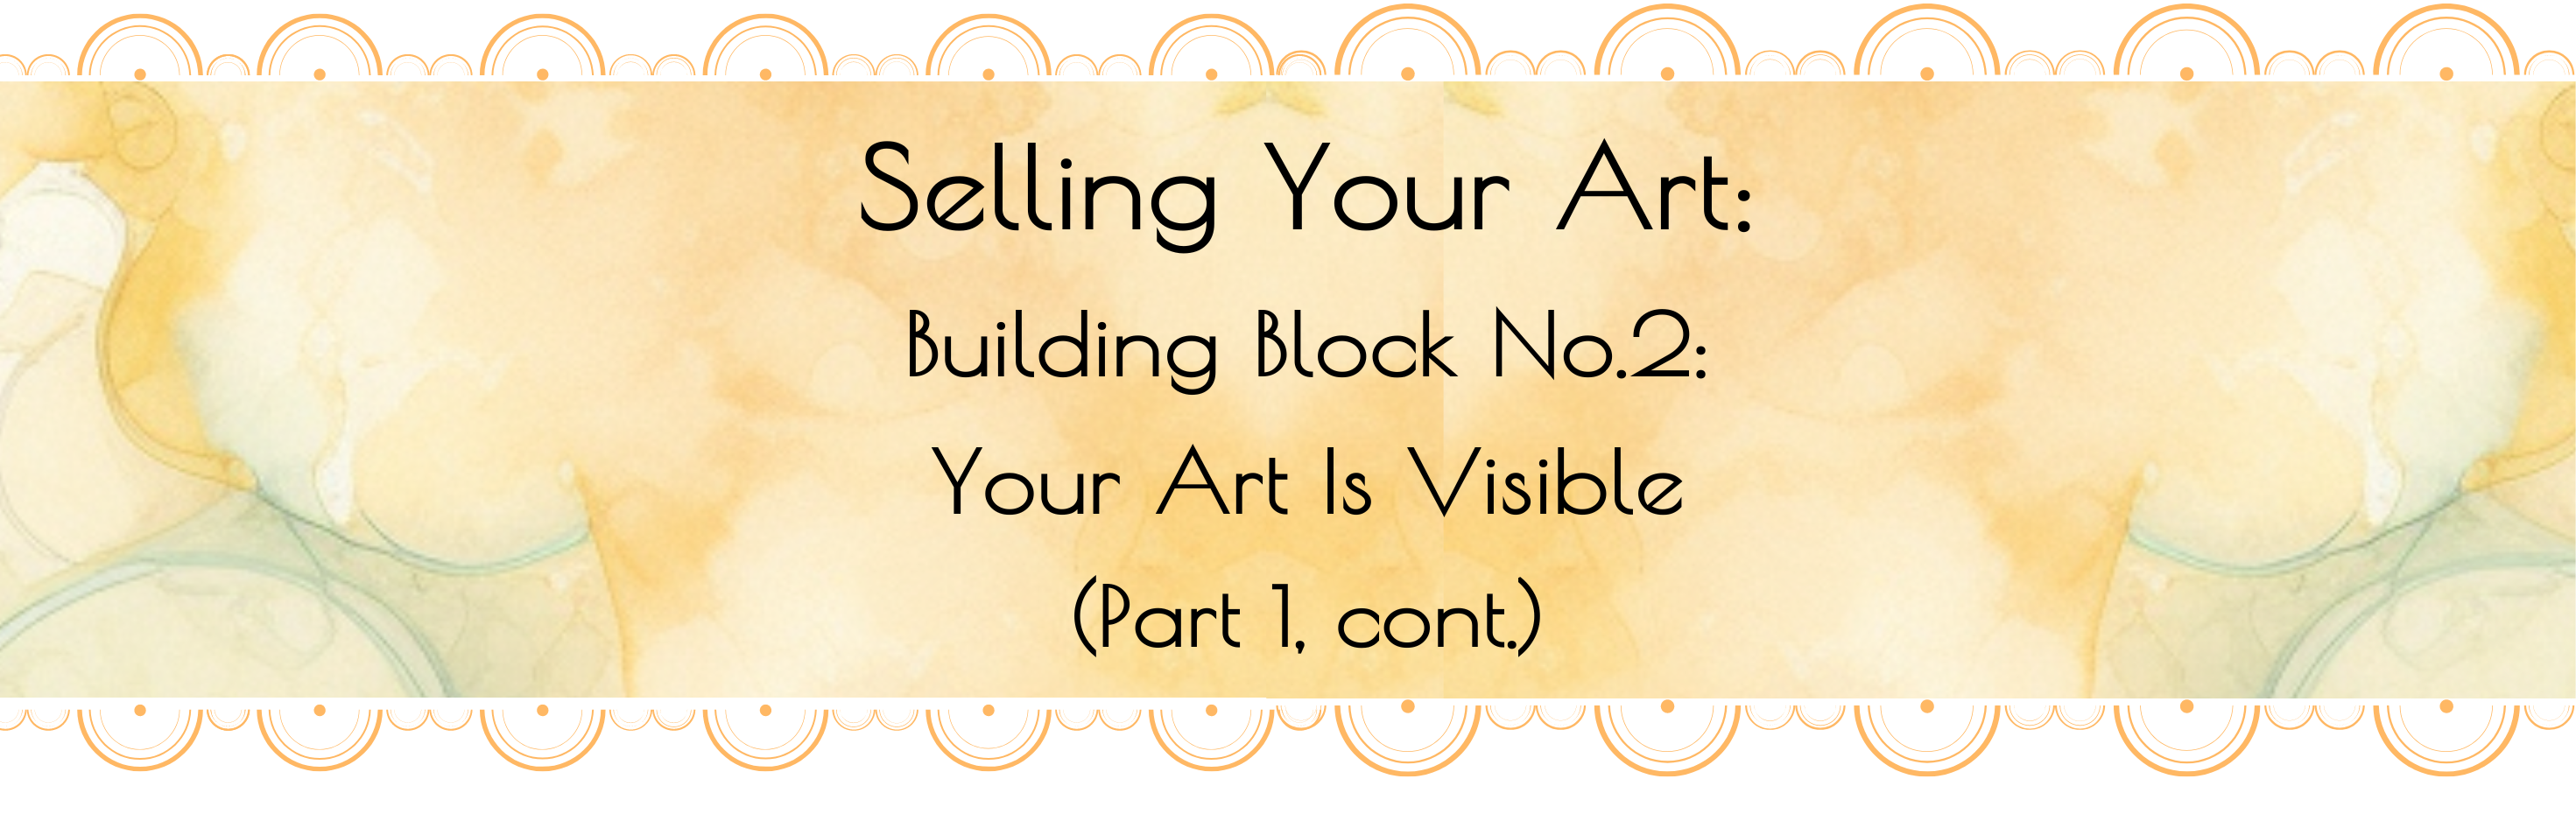 selling your art building block no.2 your art is visible